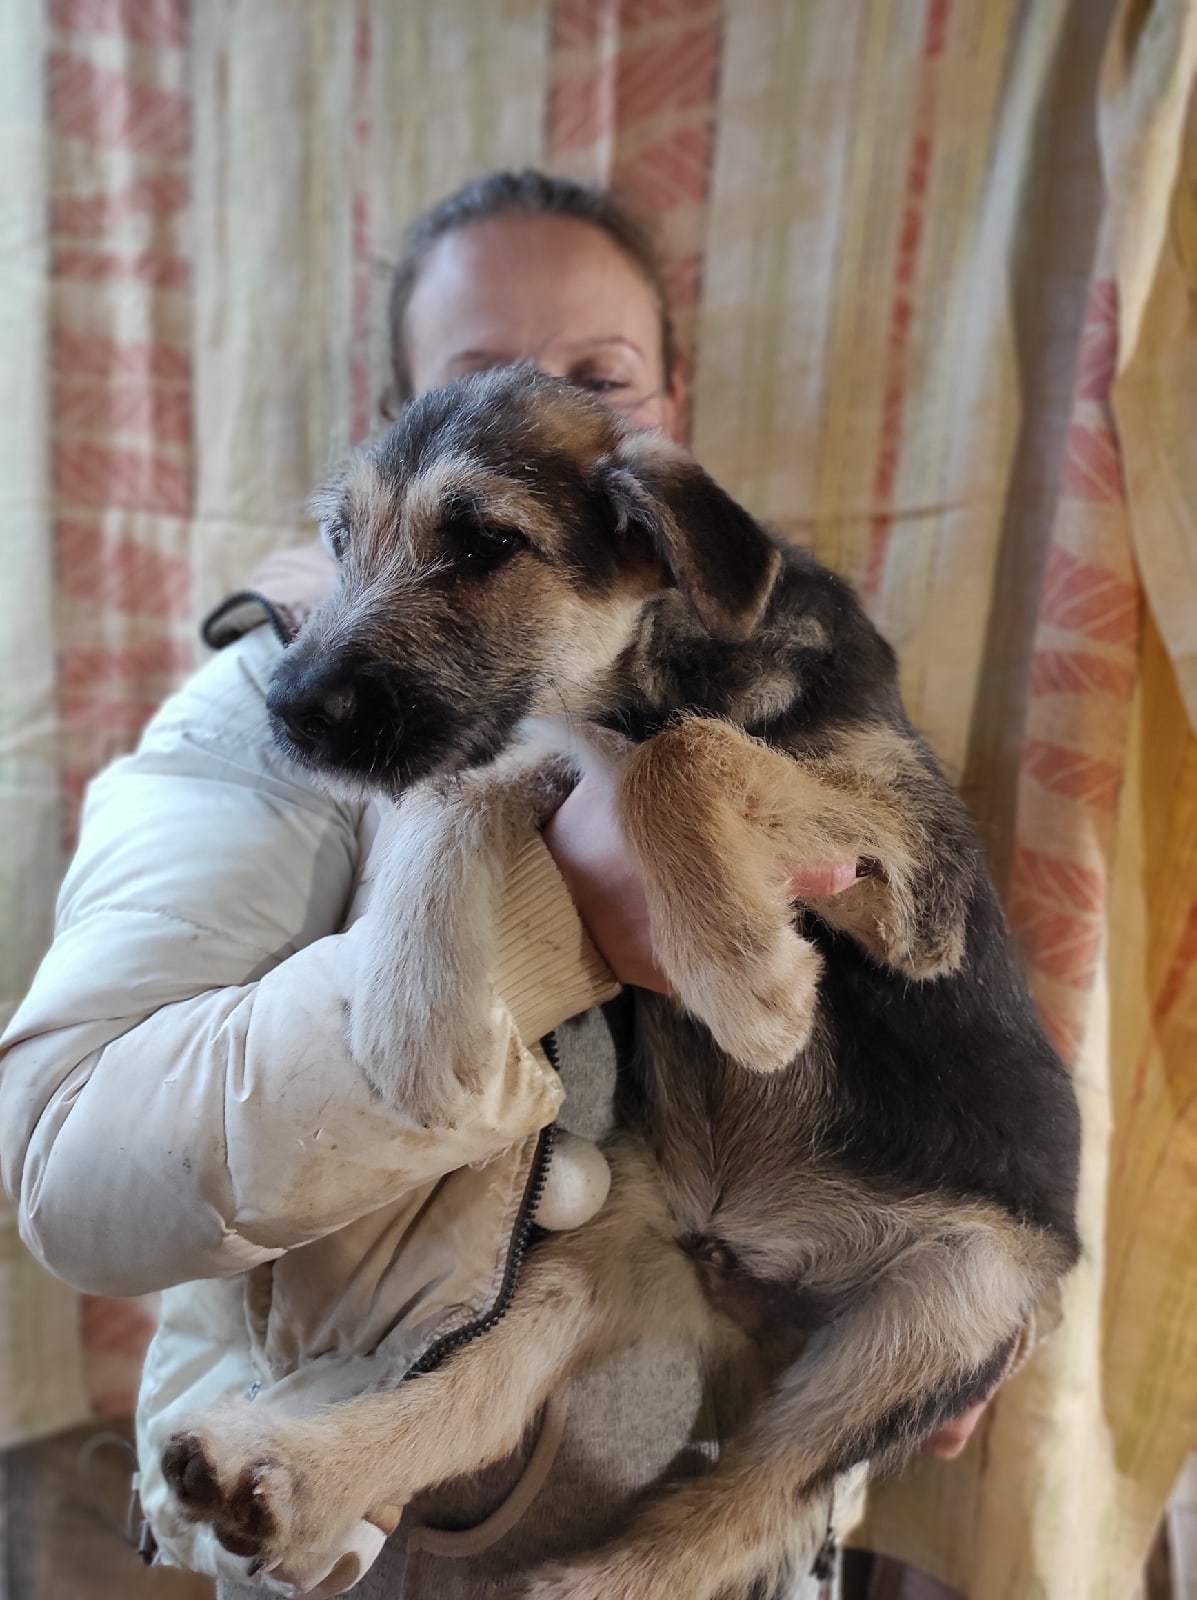 Bearded puppies in good hands - No rating, In good hands, I will give, Puppies, Beard, Dog, Pets, Moscow region, , Sergiev Posad, Moscow, Male, Muzzle, Pets, Dogs and people, Pet, Young, Toddlers, Longpost, Children